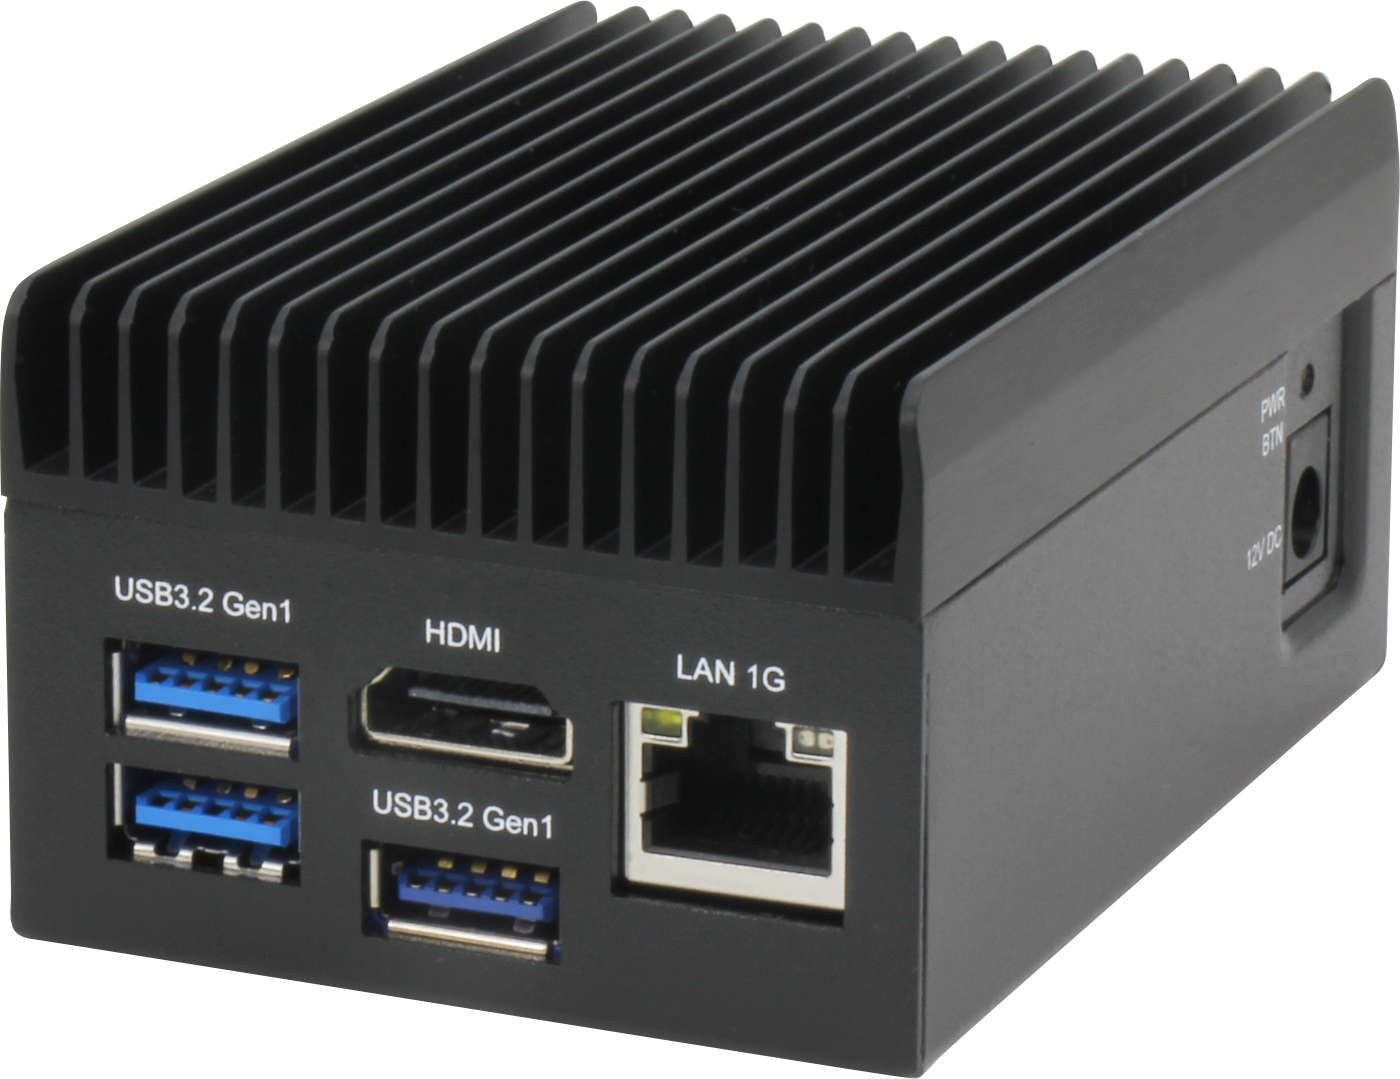 The UP 7000 Edge is a Palm-Sized Mini PC Hosting the Full Intel® Processor N-series Lineup